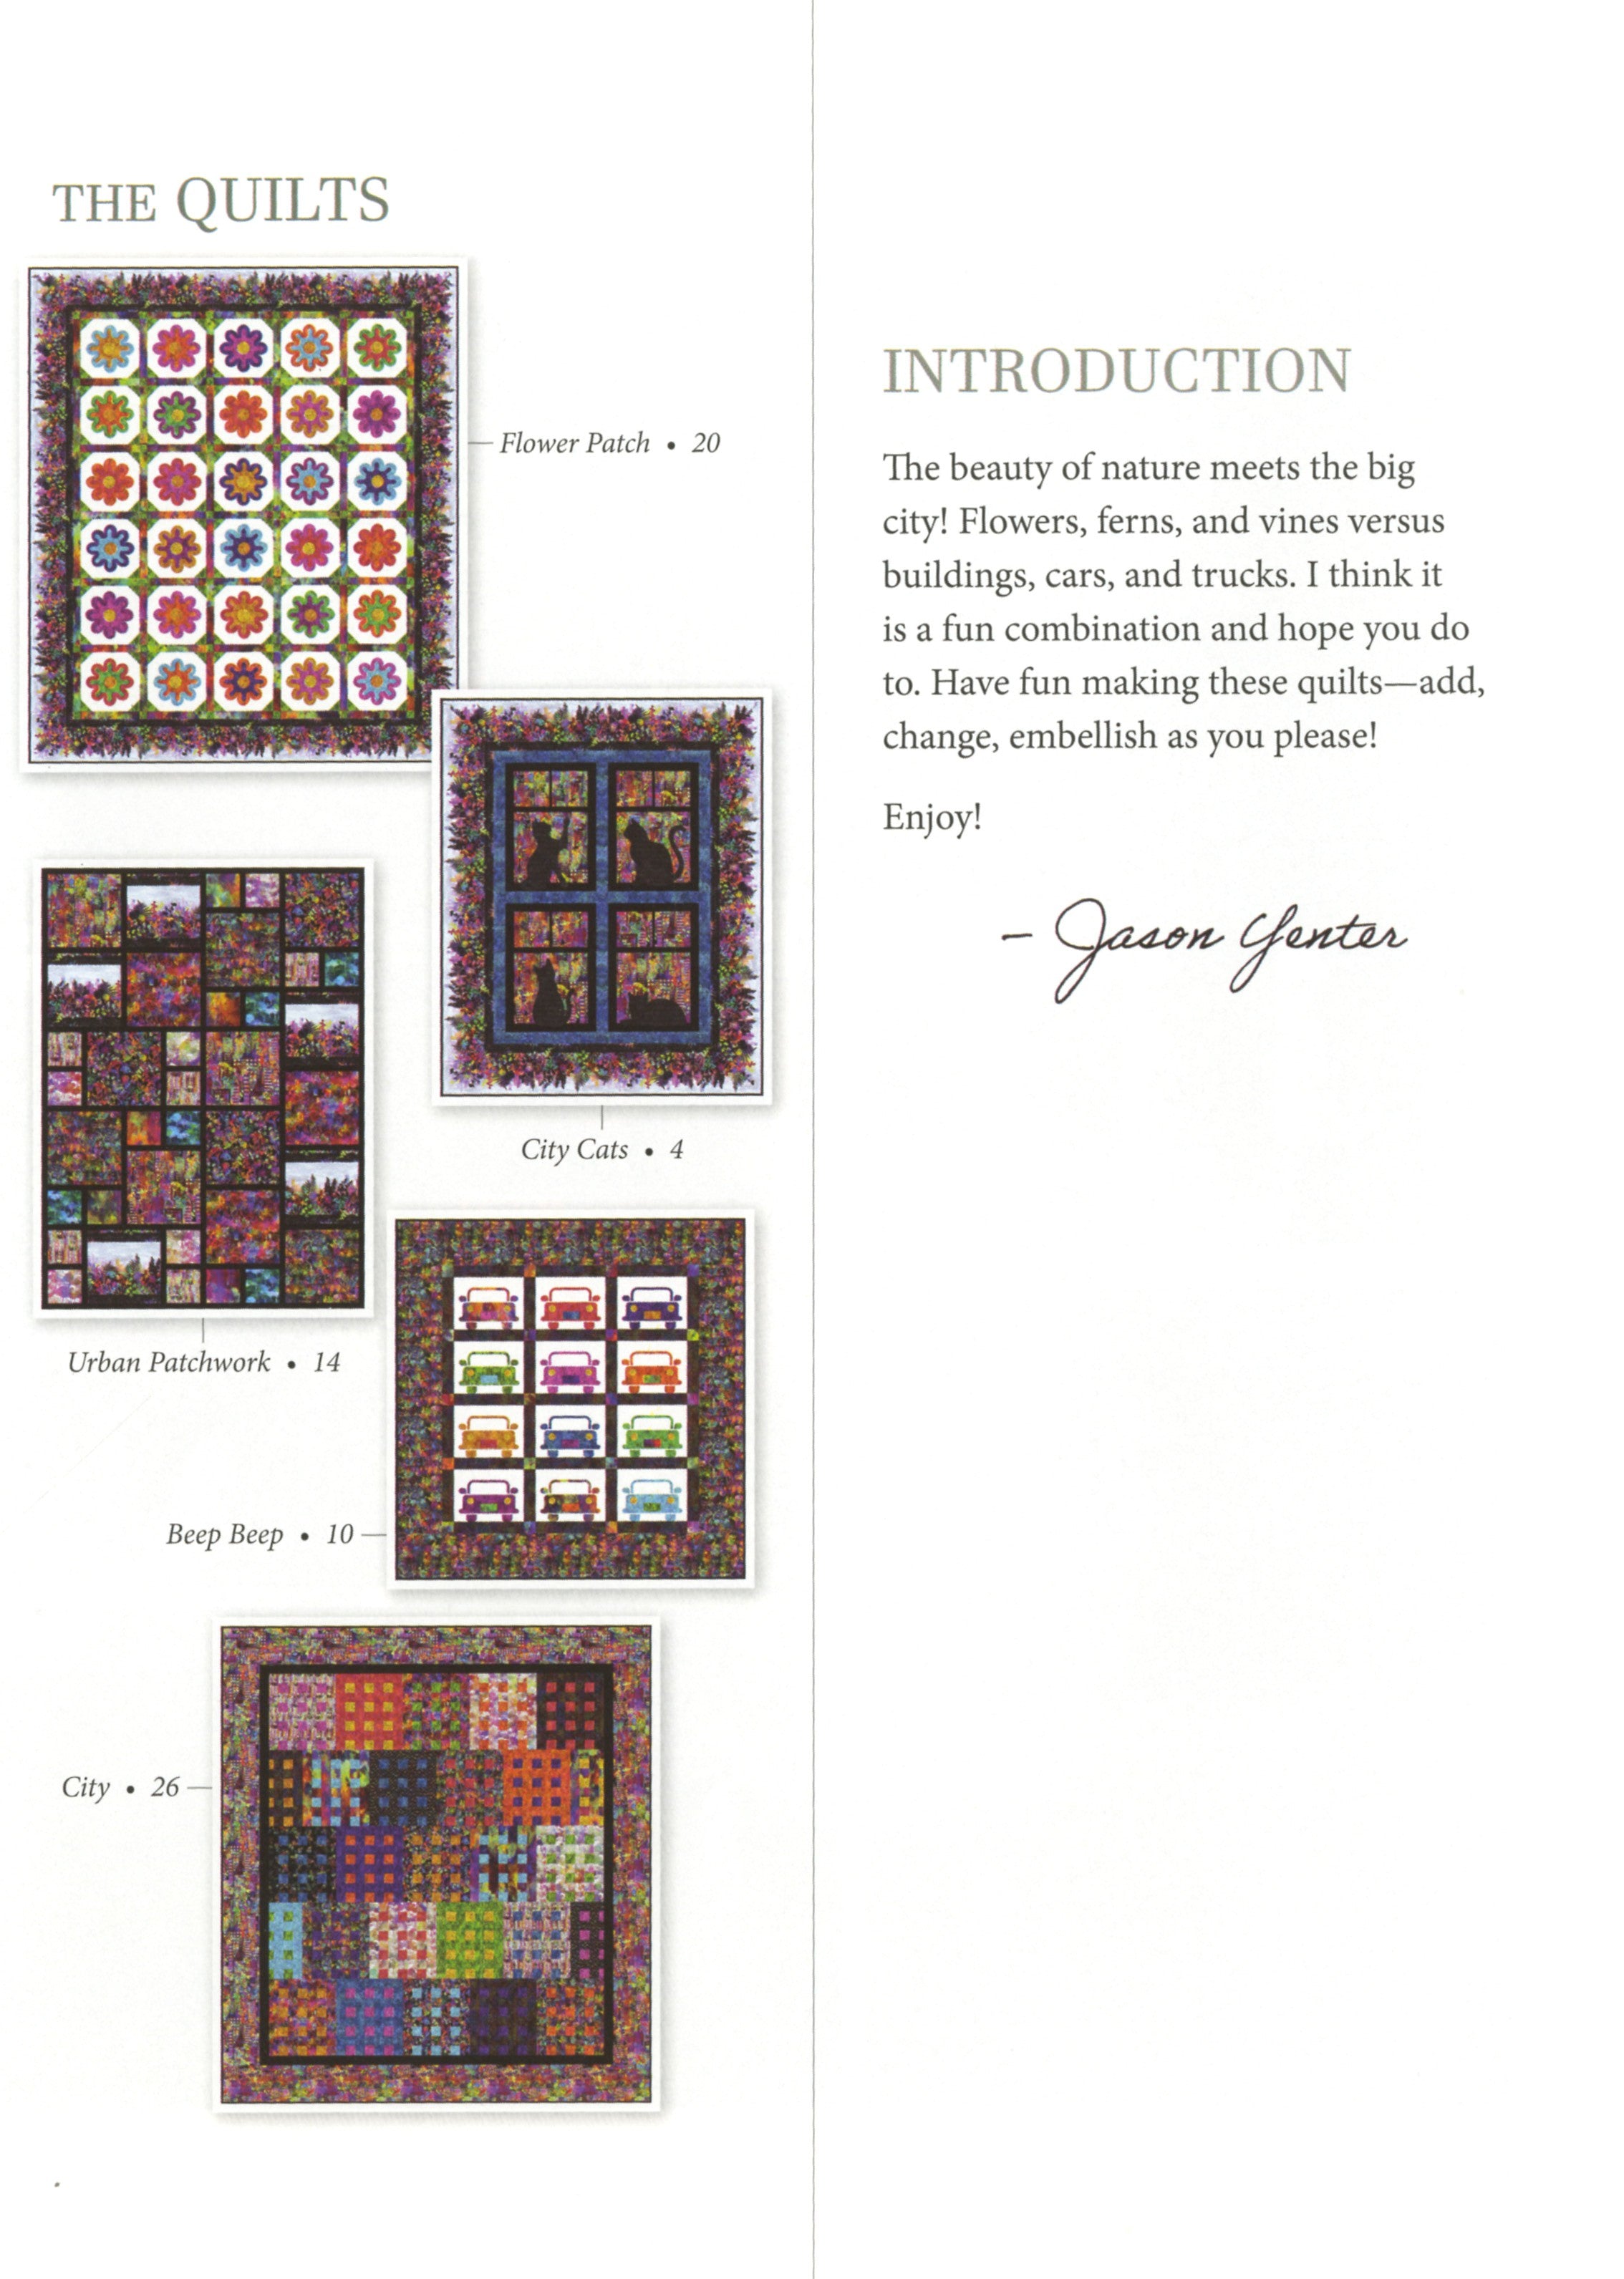 Urban Jungle Quilts Pattern Book by Jason Yenter for In The Beginning Fabrics